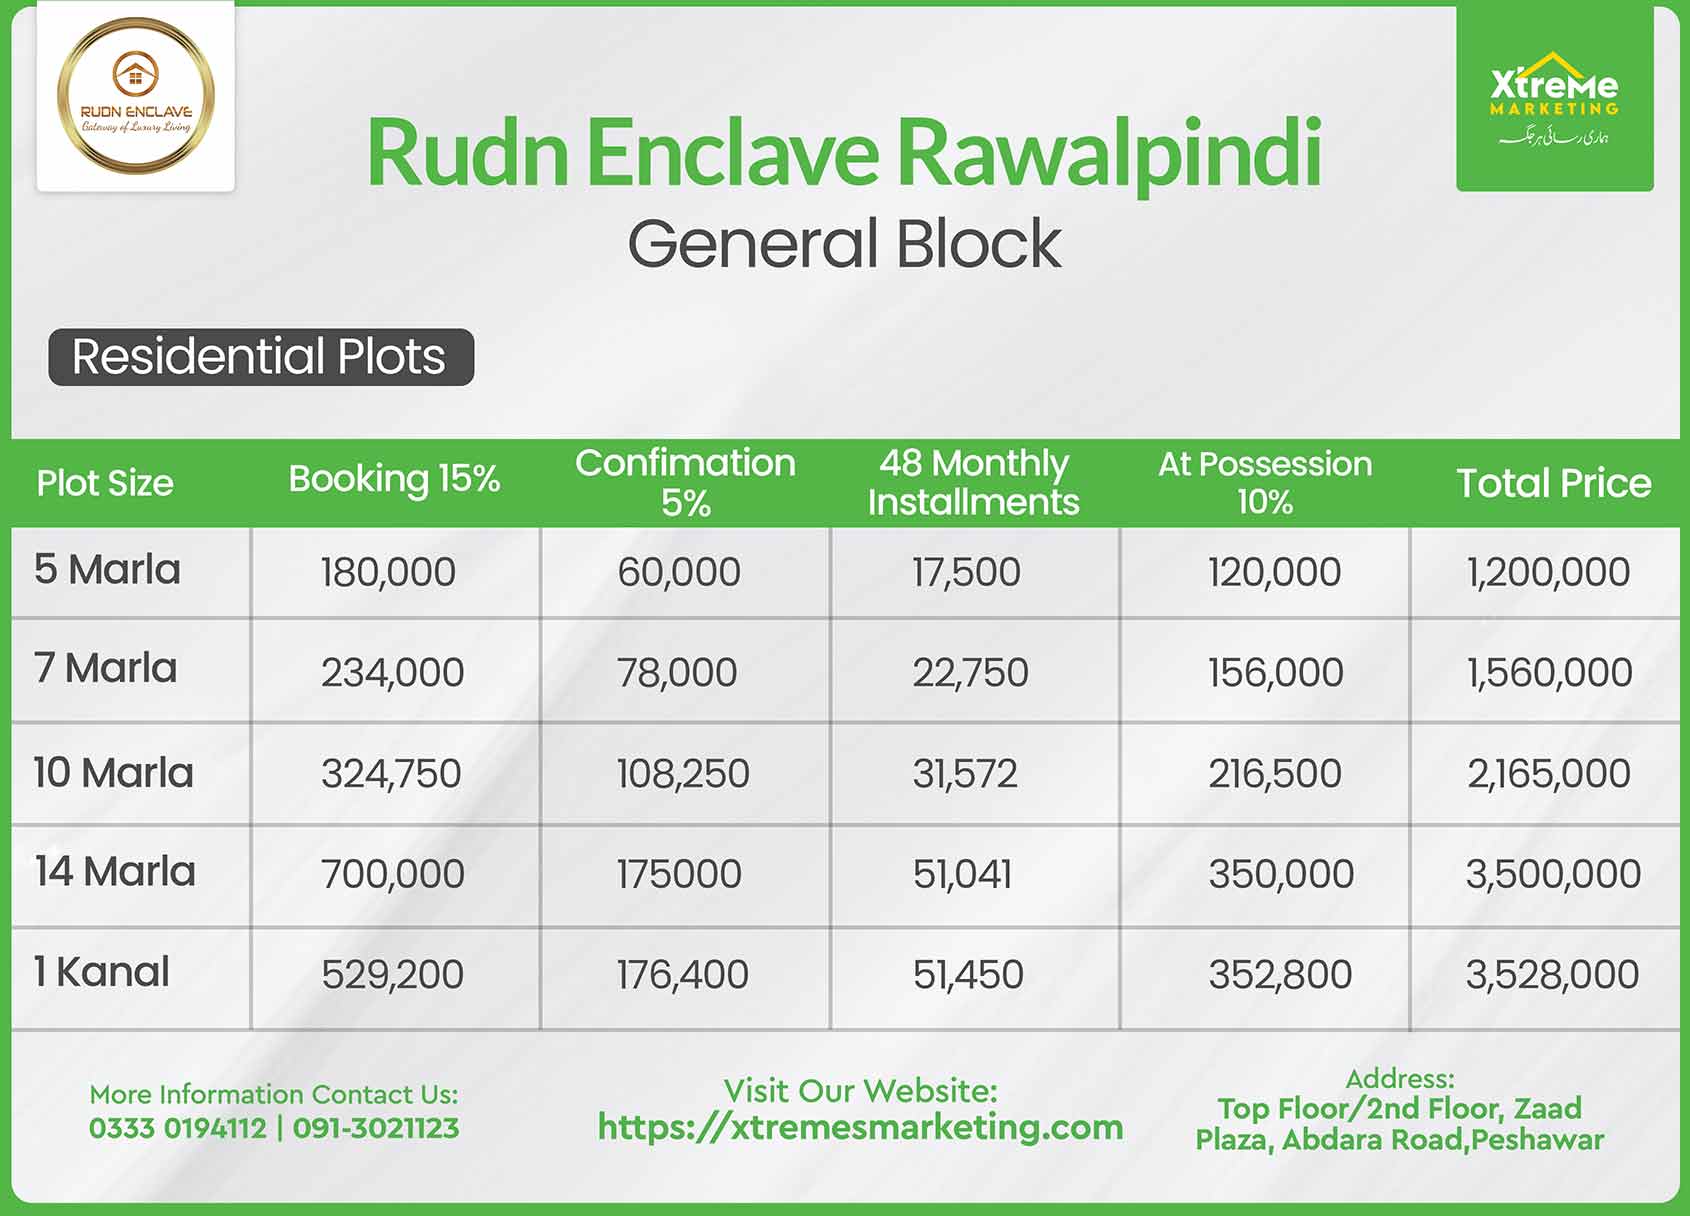 Payment Plan of the rudn enclave Residential plots in General Block